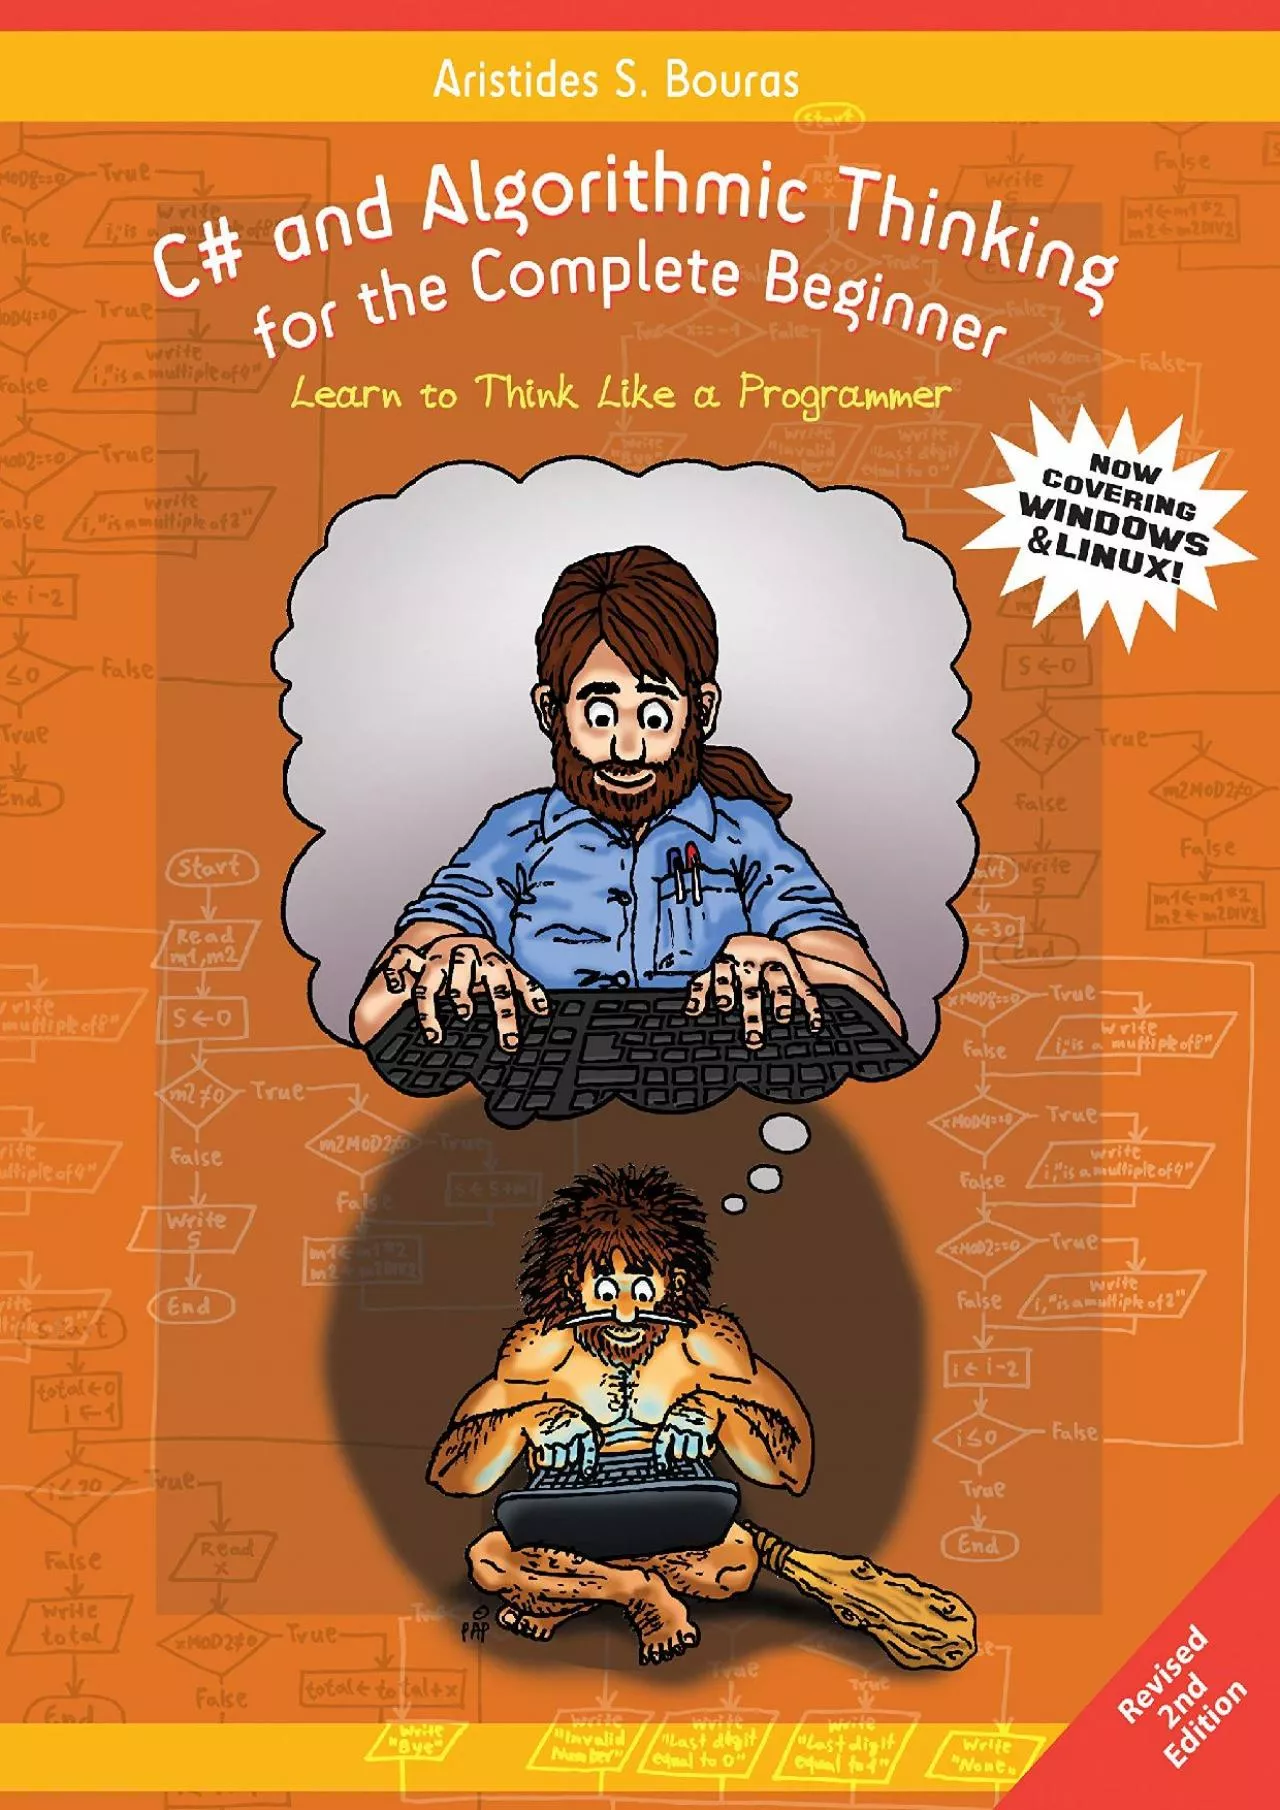 [FREE]-C and Algorithmic Thinking for the Complete Beginner (2nd Edition): Learn to Think